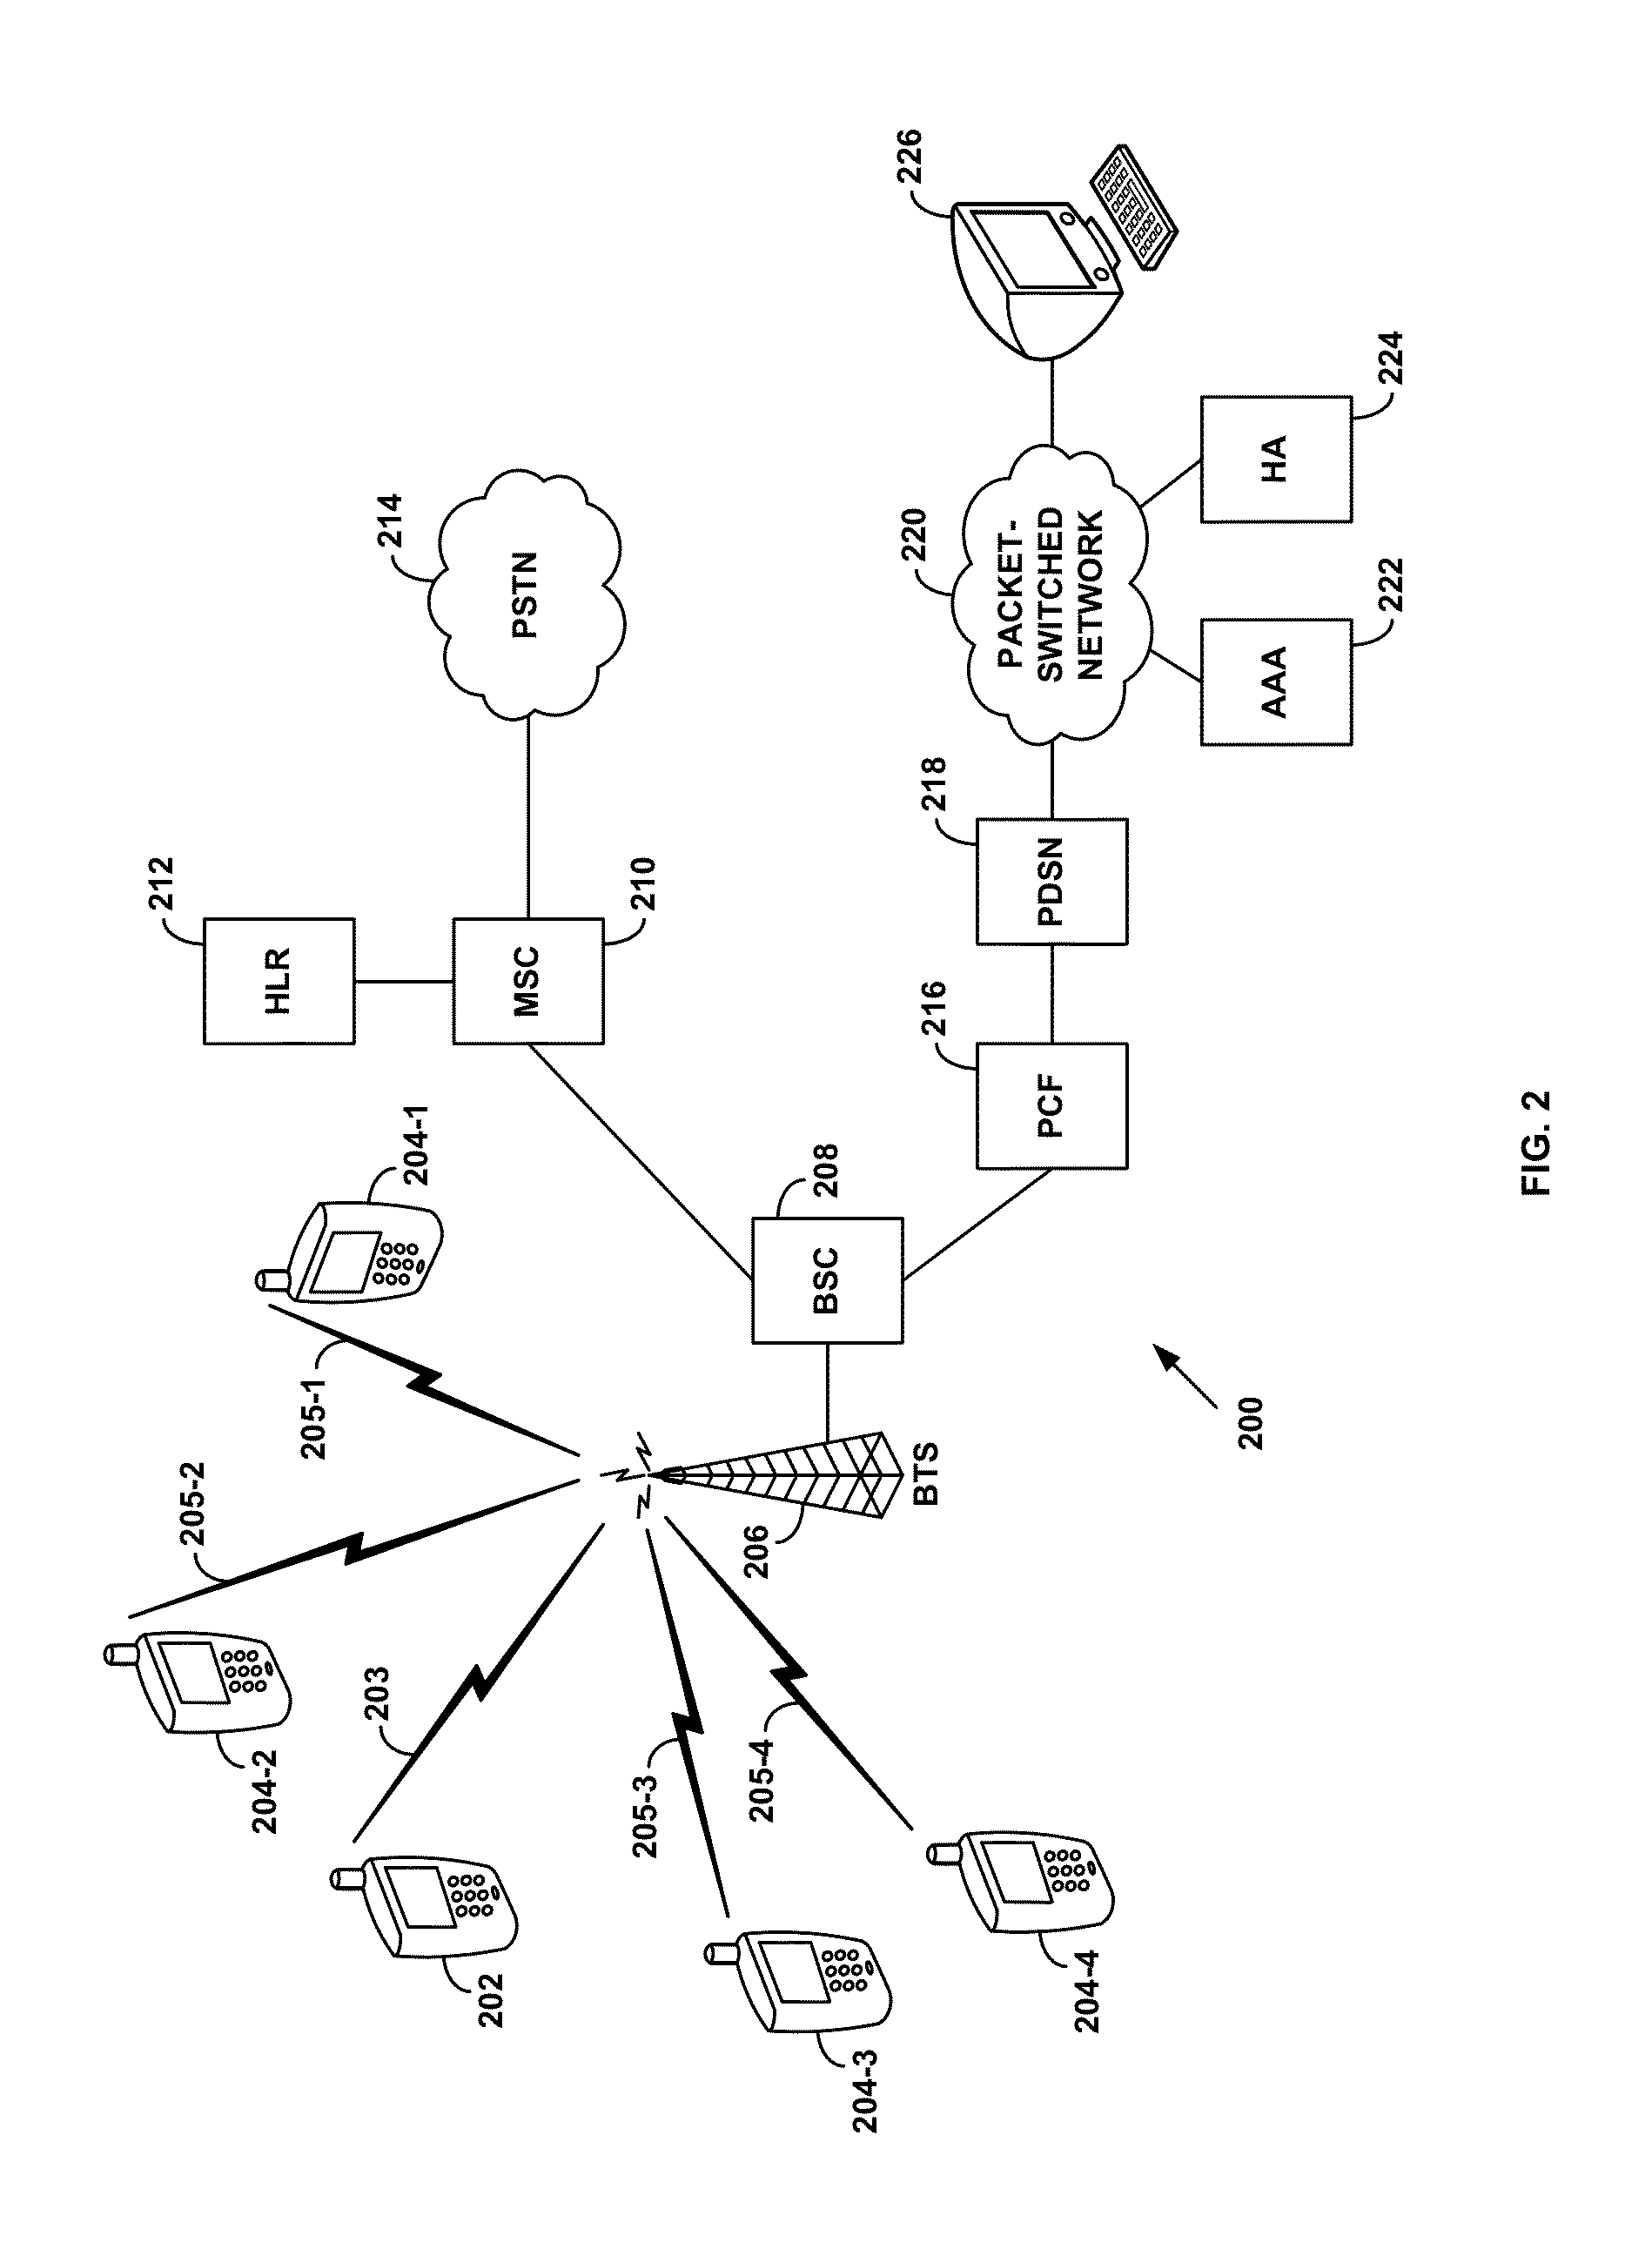 Specification of forward-link rate control based on neighbor load